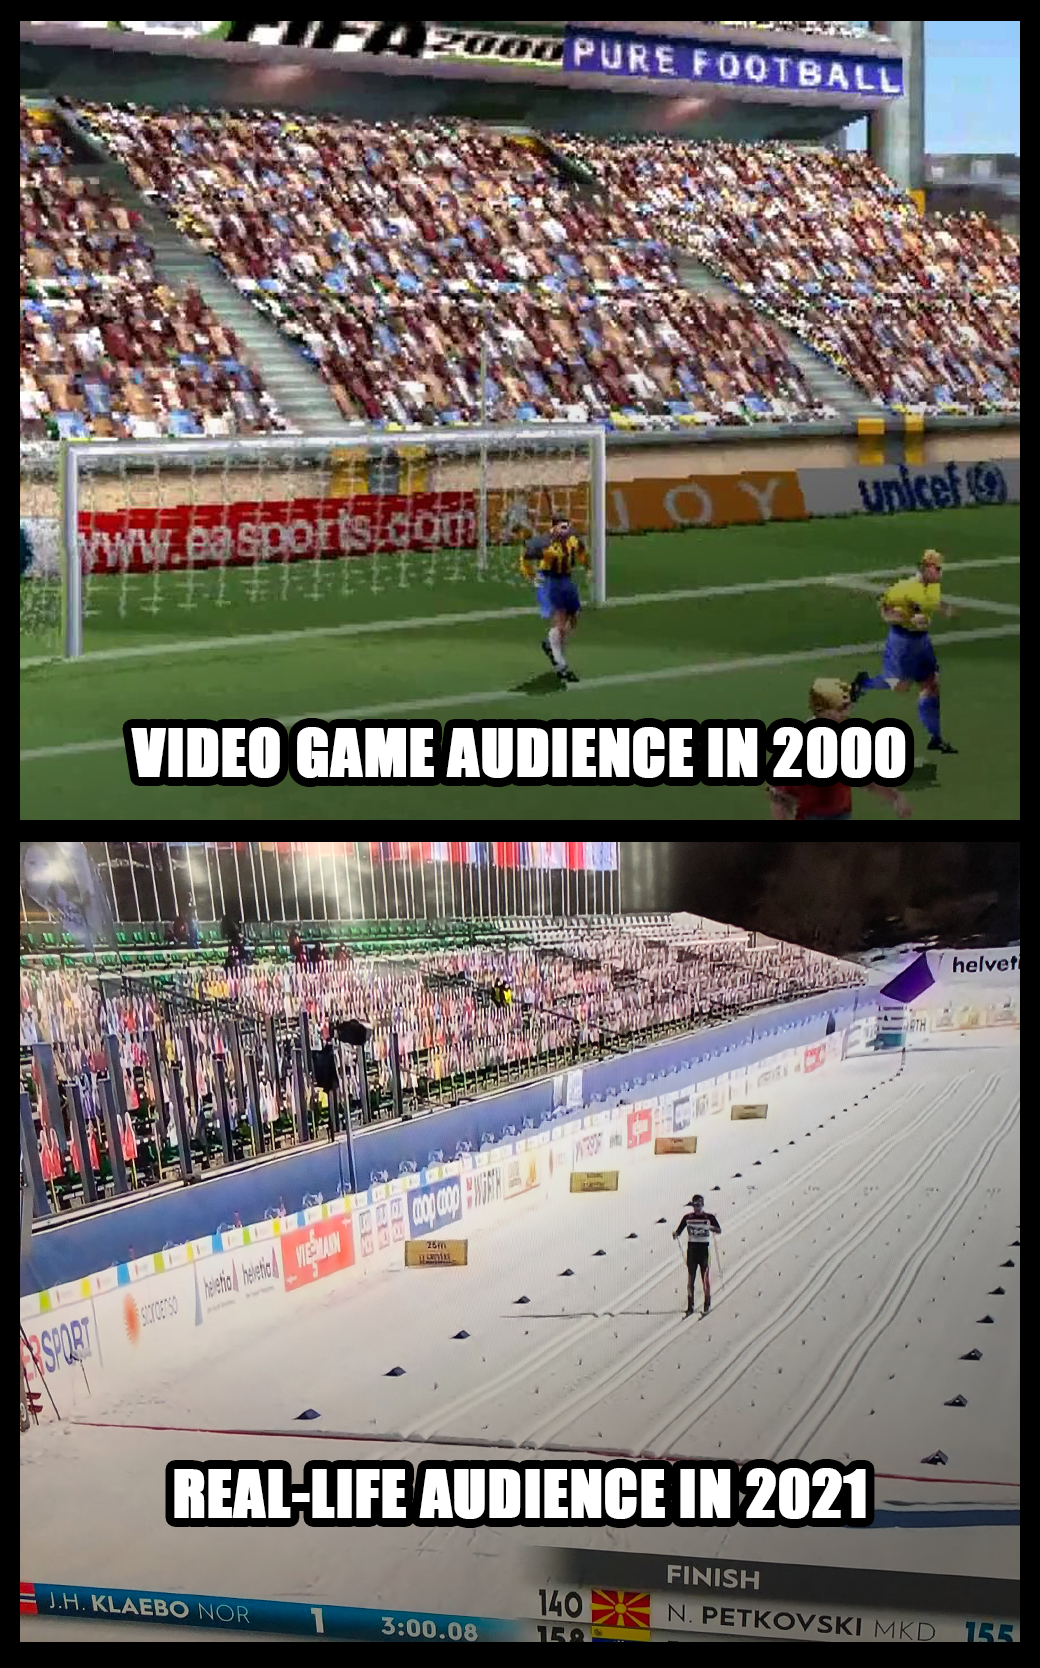 graphics+really+did+peak+back+then